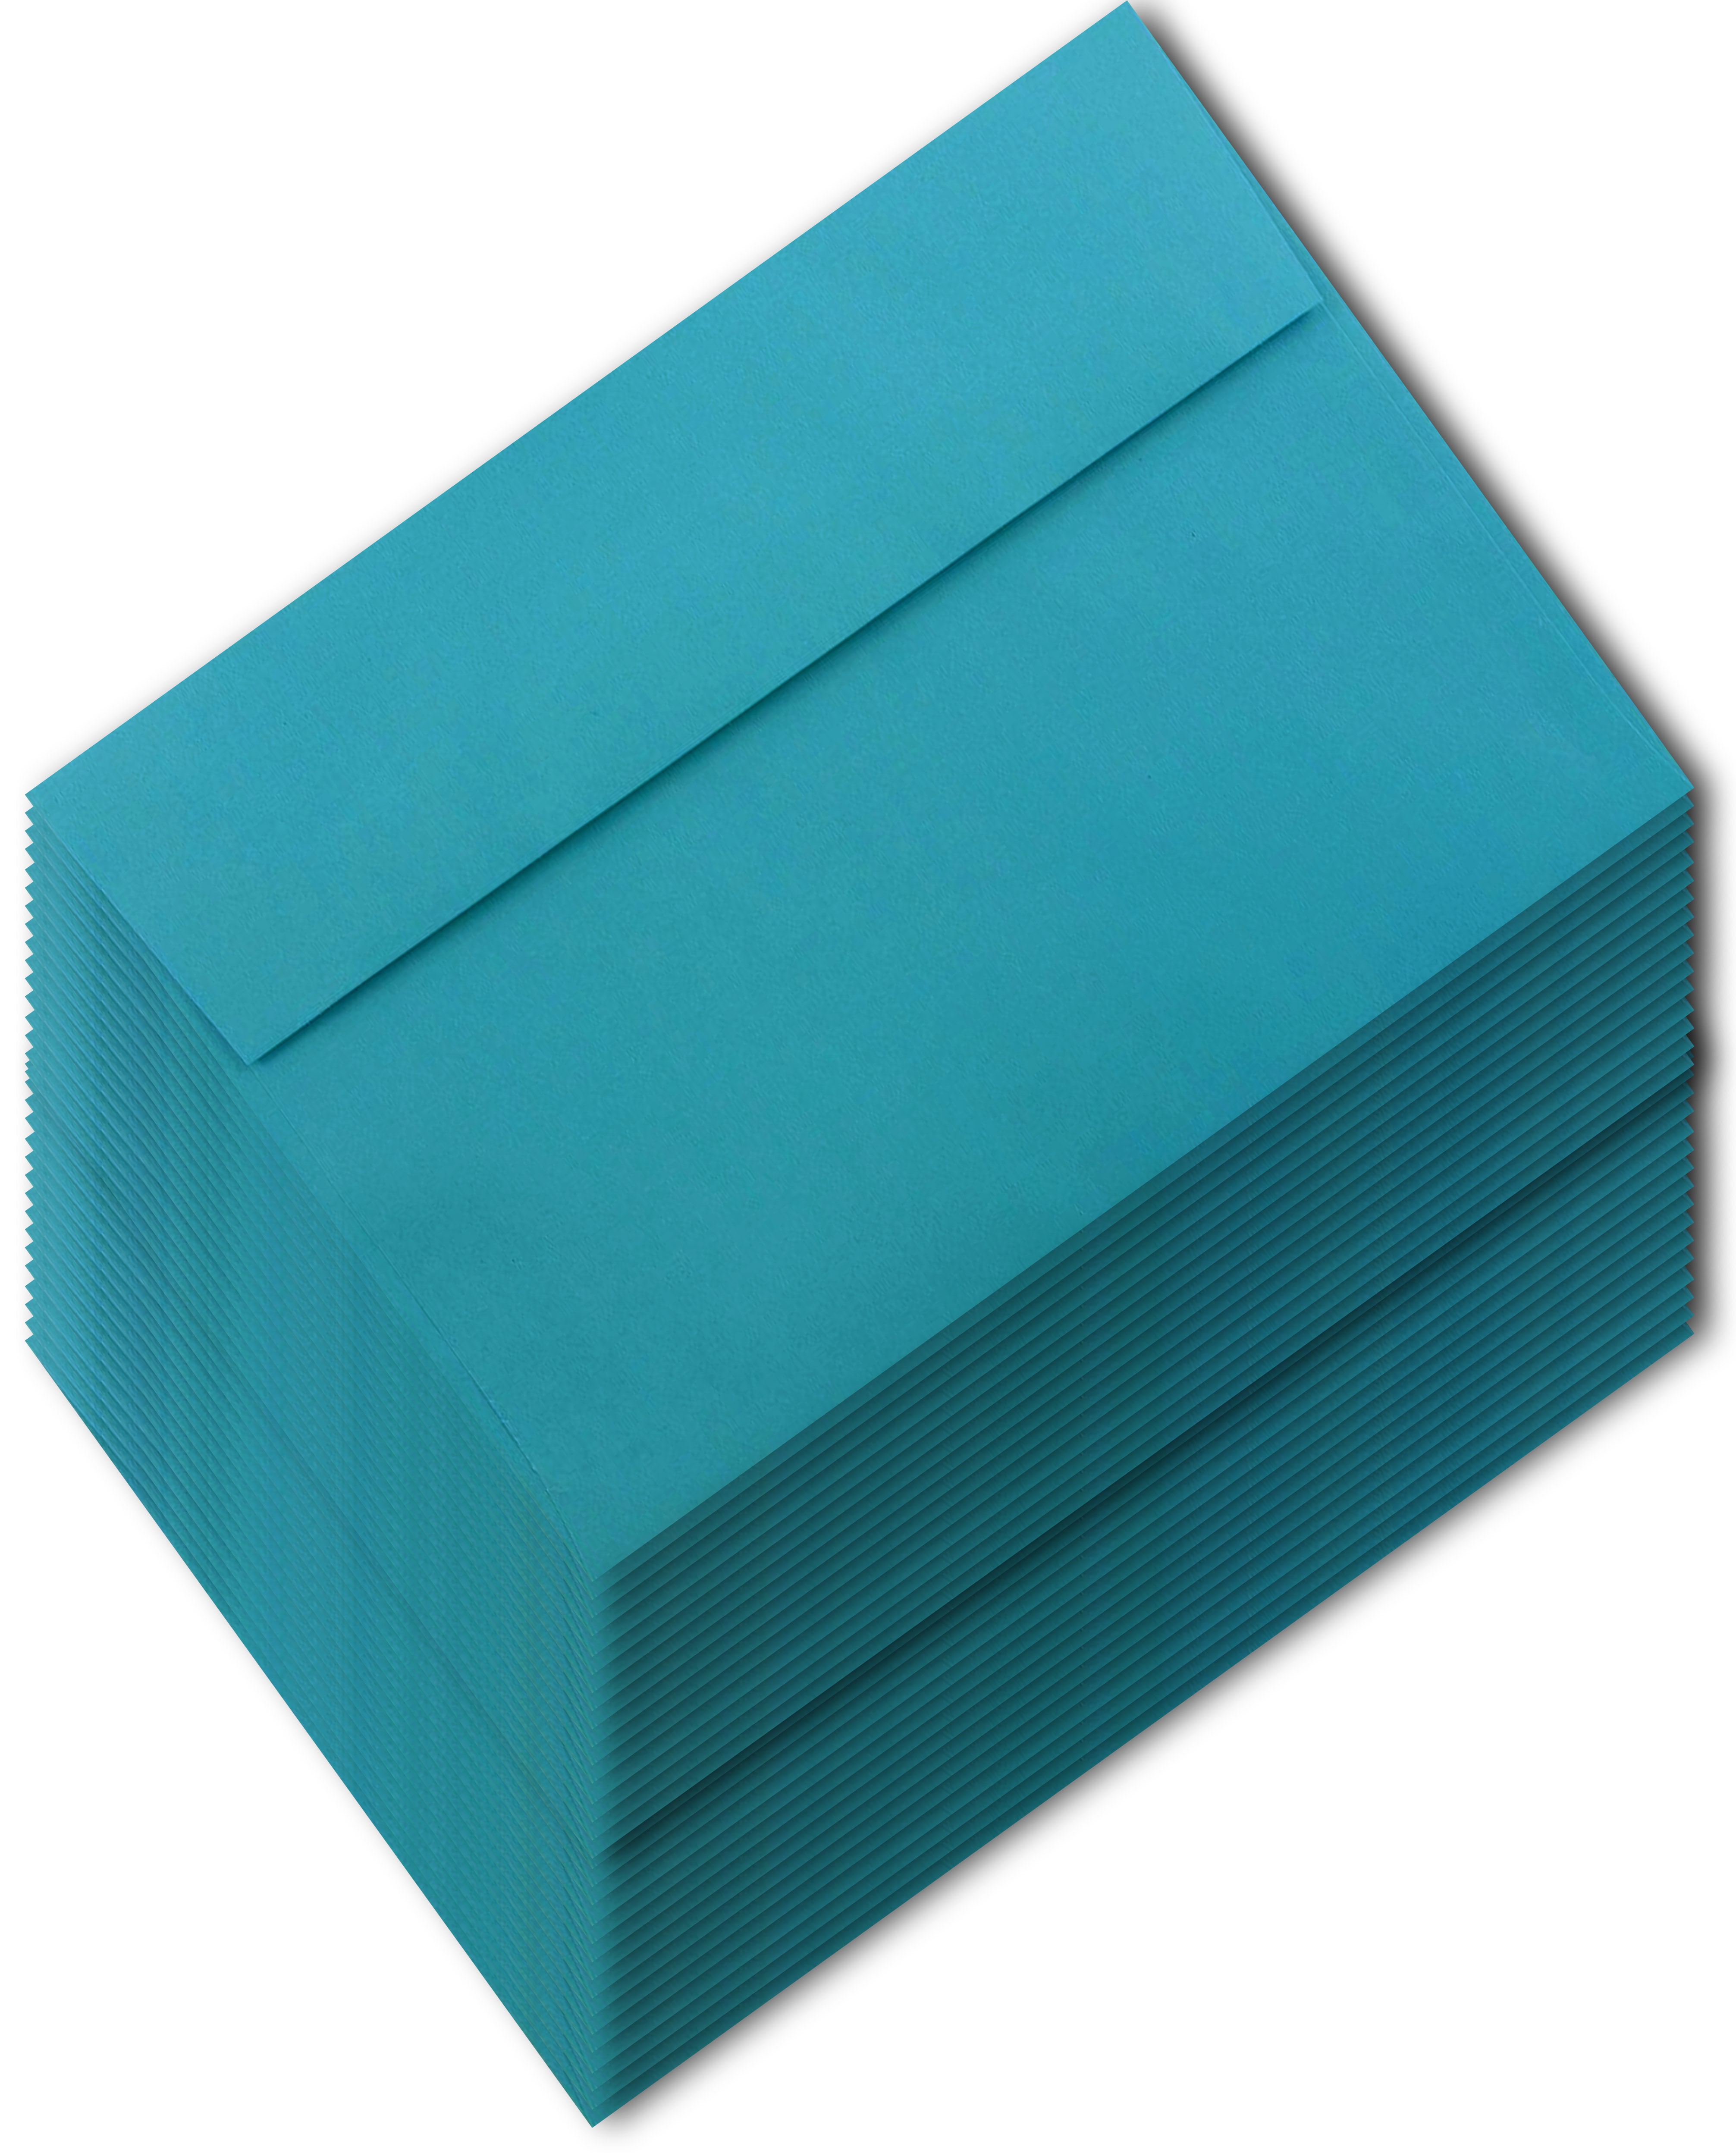 Teal / Aqua 25 Pack A7 Envelopes (5.25 x 7.25) for 5 x 7 Cards, Invitations, Announcements by The Envelope Gallery - image 2 of 2